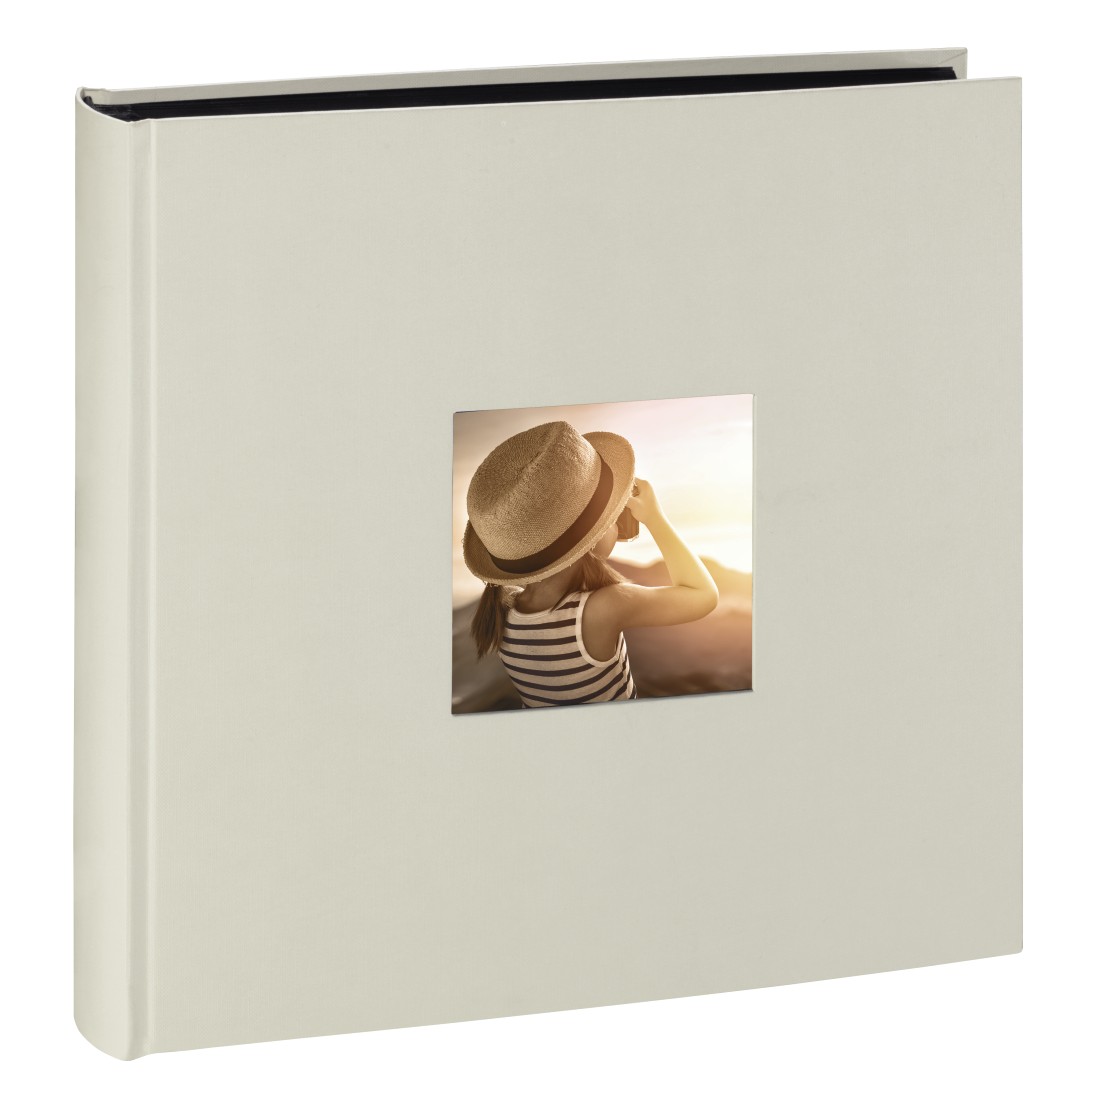 Hama Fine Art Album - Classical look - gives an elegant, timeless touch